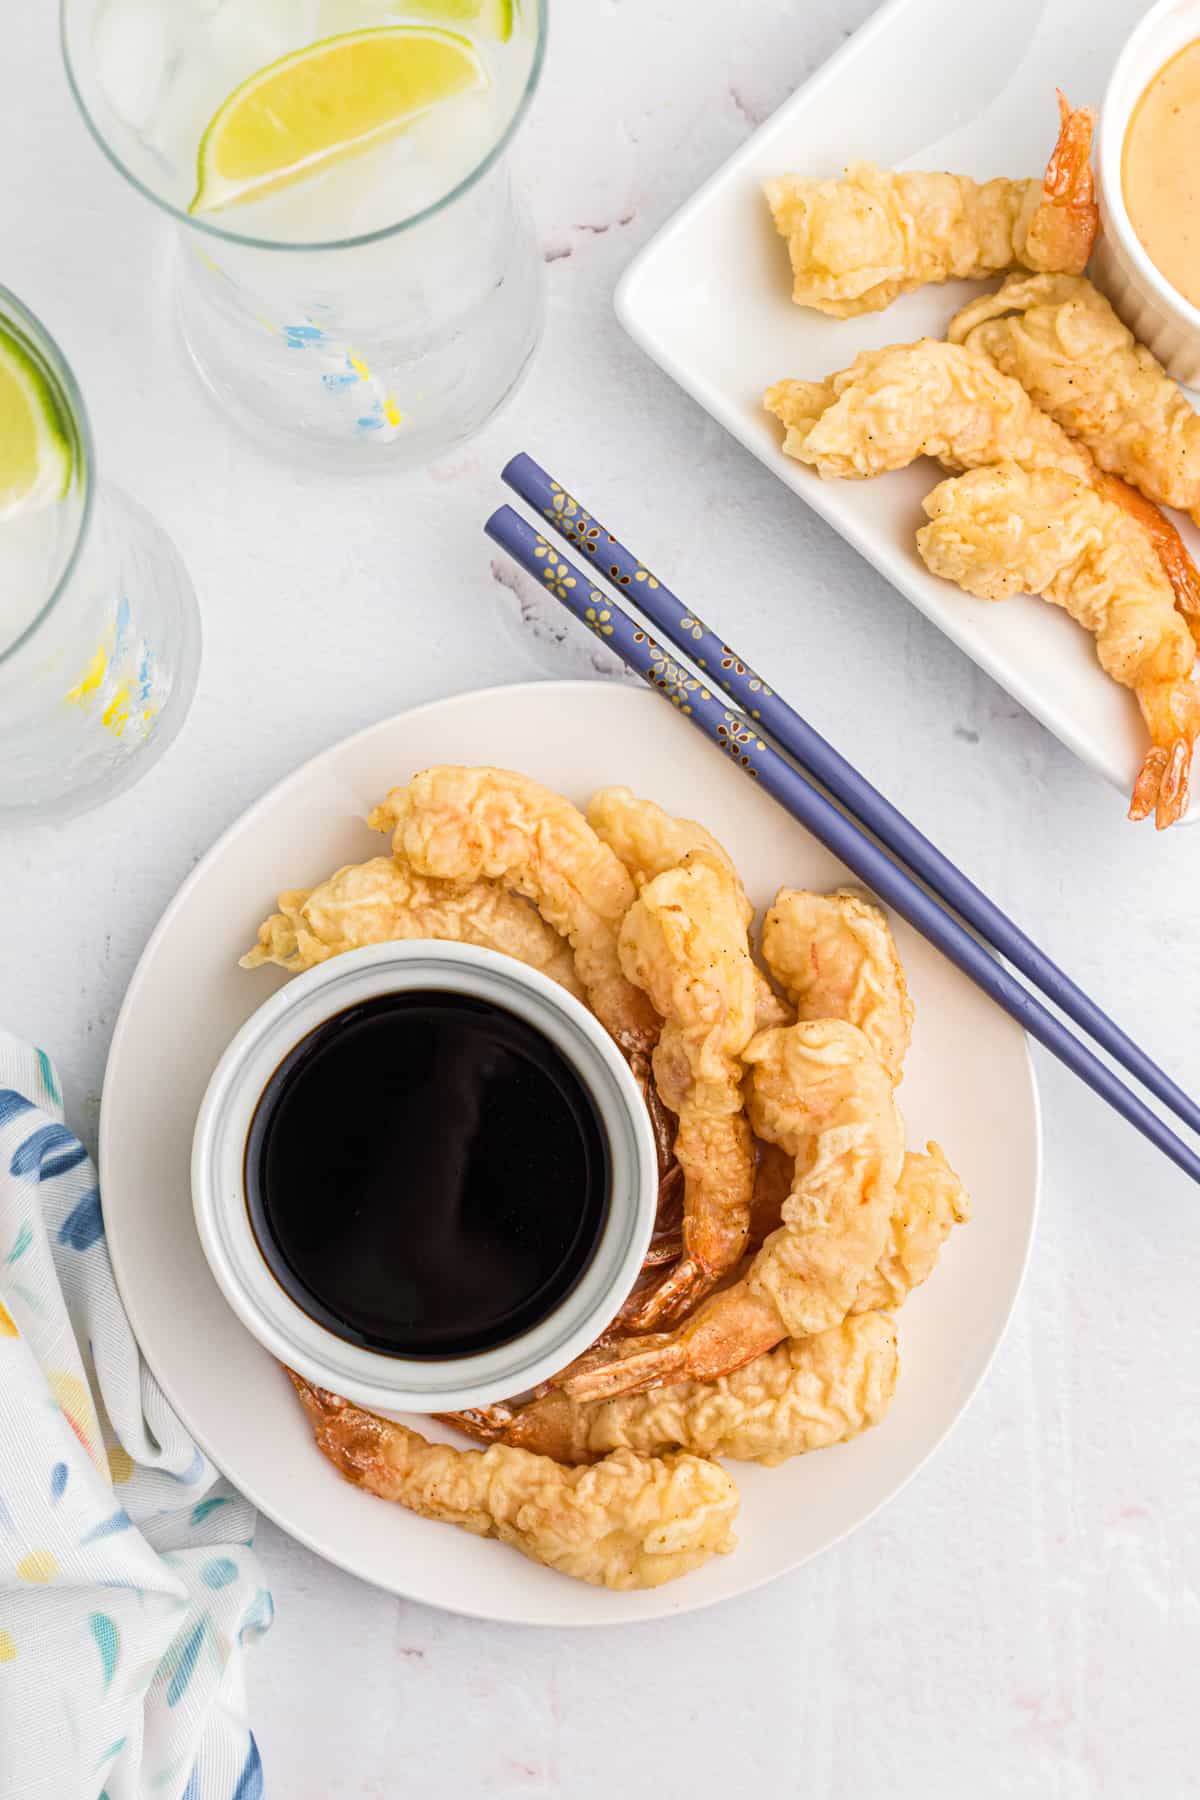 Several fried shrimp are placed around a small bowl filled with soy sauce.